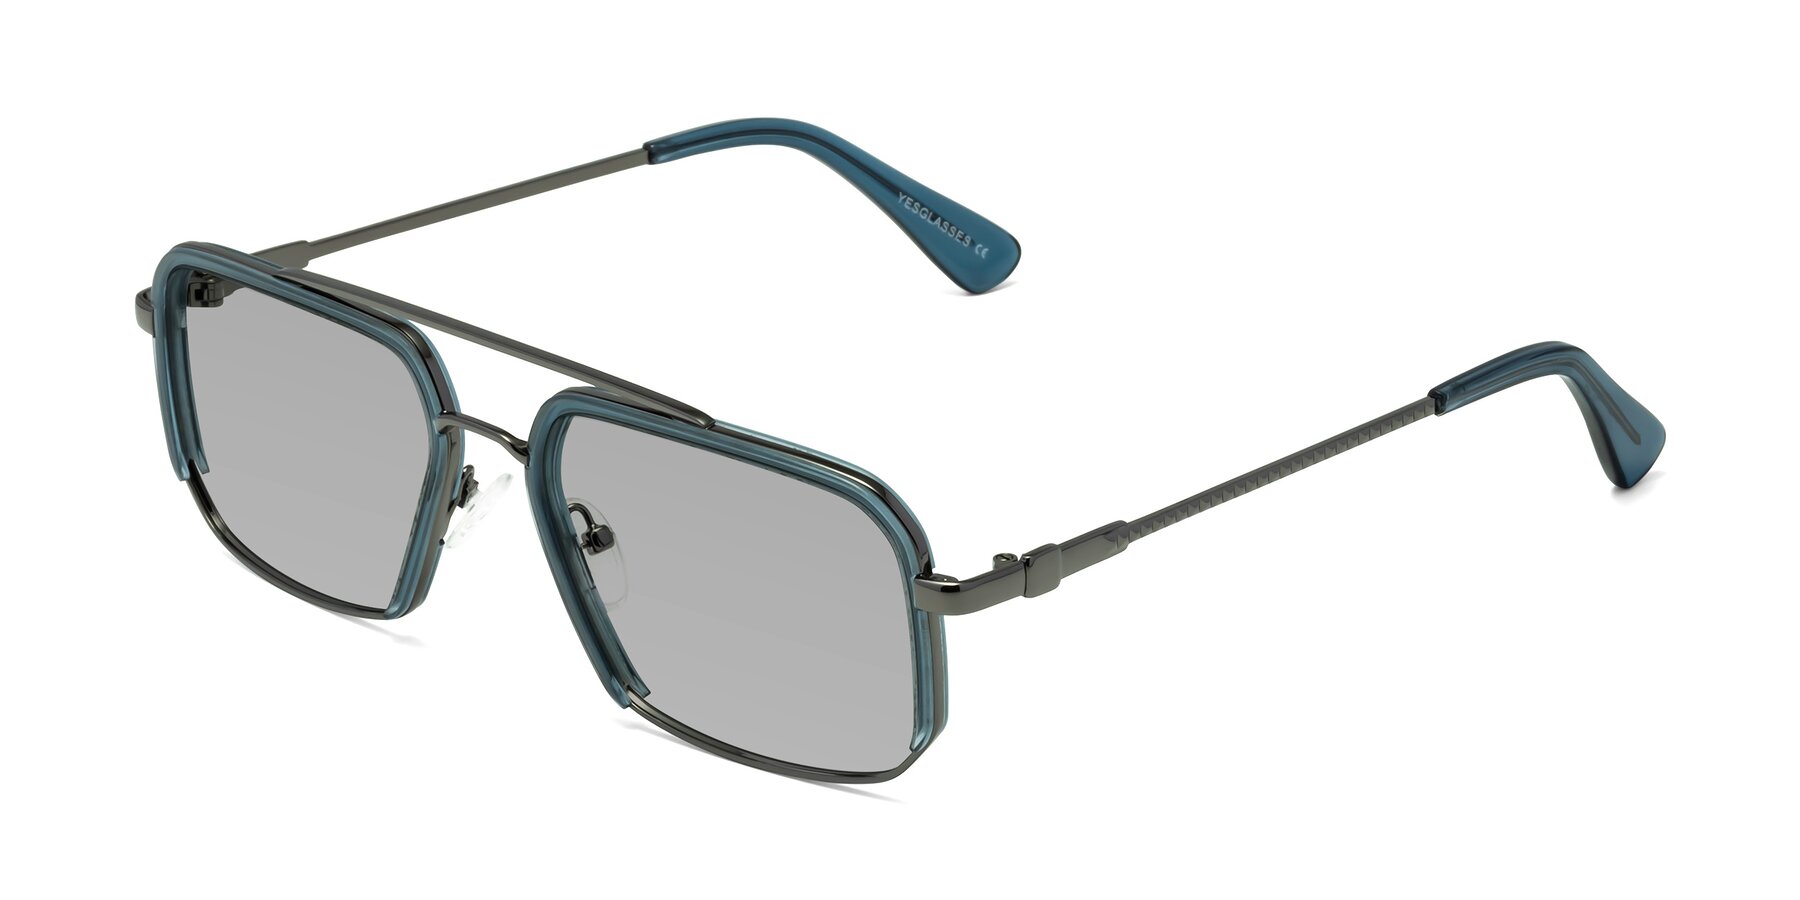 Angle of Dechter in Teal-Gunmetal with Light Gray Tinted Lenses